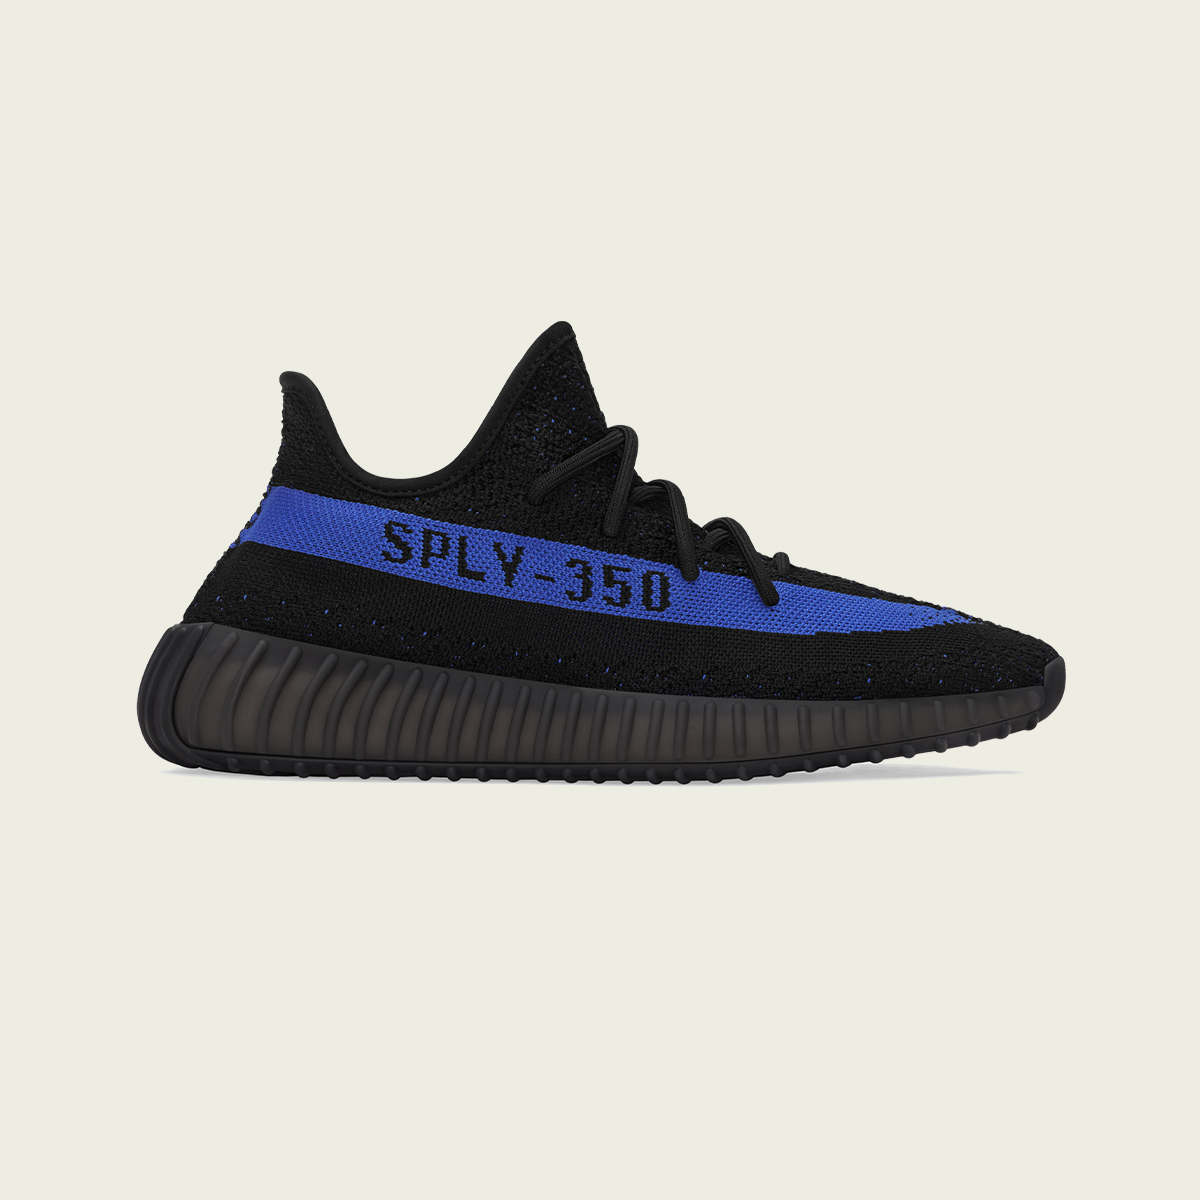 filósofo persona regular Foot Locker on Twitter: "#YEEZY 350 V2 'DAZZLING BLUE' LAUNCHES FEBRUARY 26  IN MENS AND KIDS SIZES. https://t.co/yMut9o9yj4" / Twitter